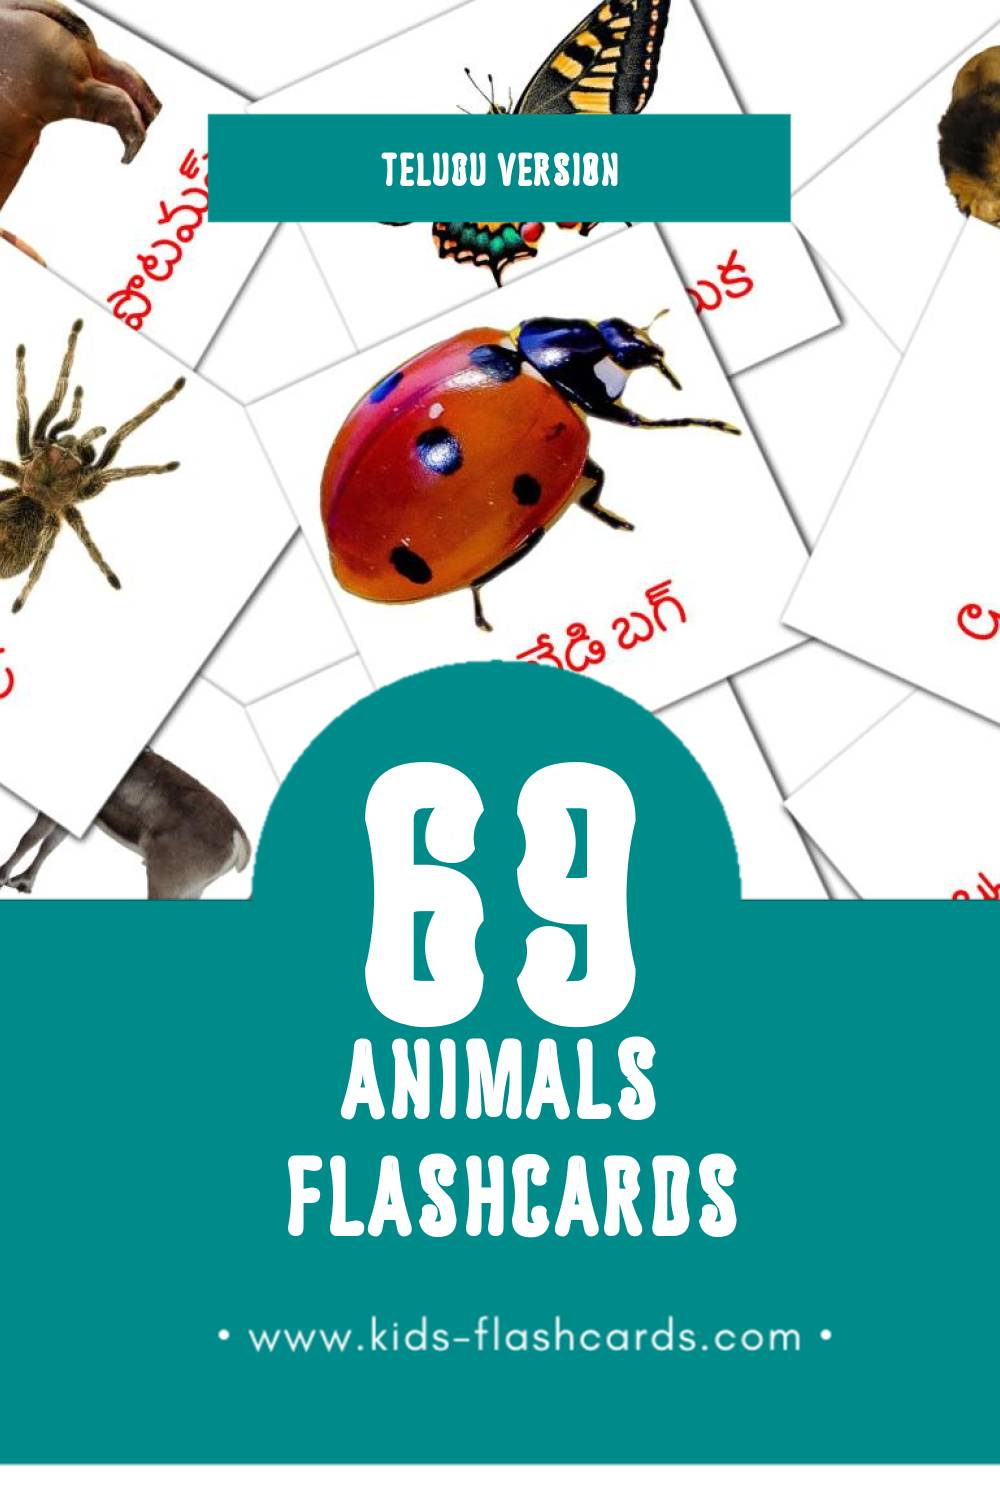 Visual Jantuvulu Flashcards for Toddlers (38 cards in Telugu)